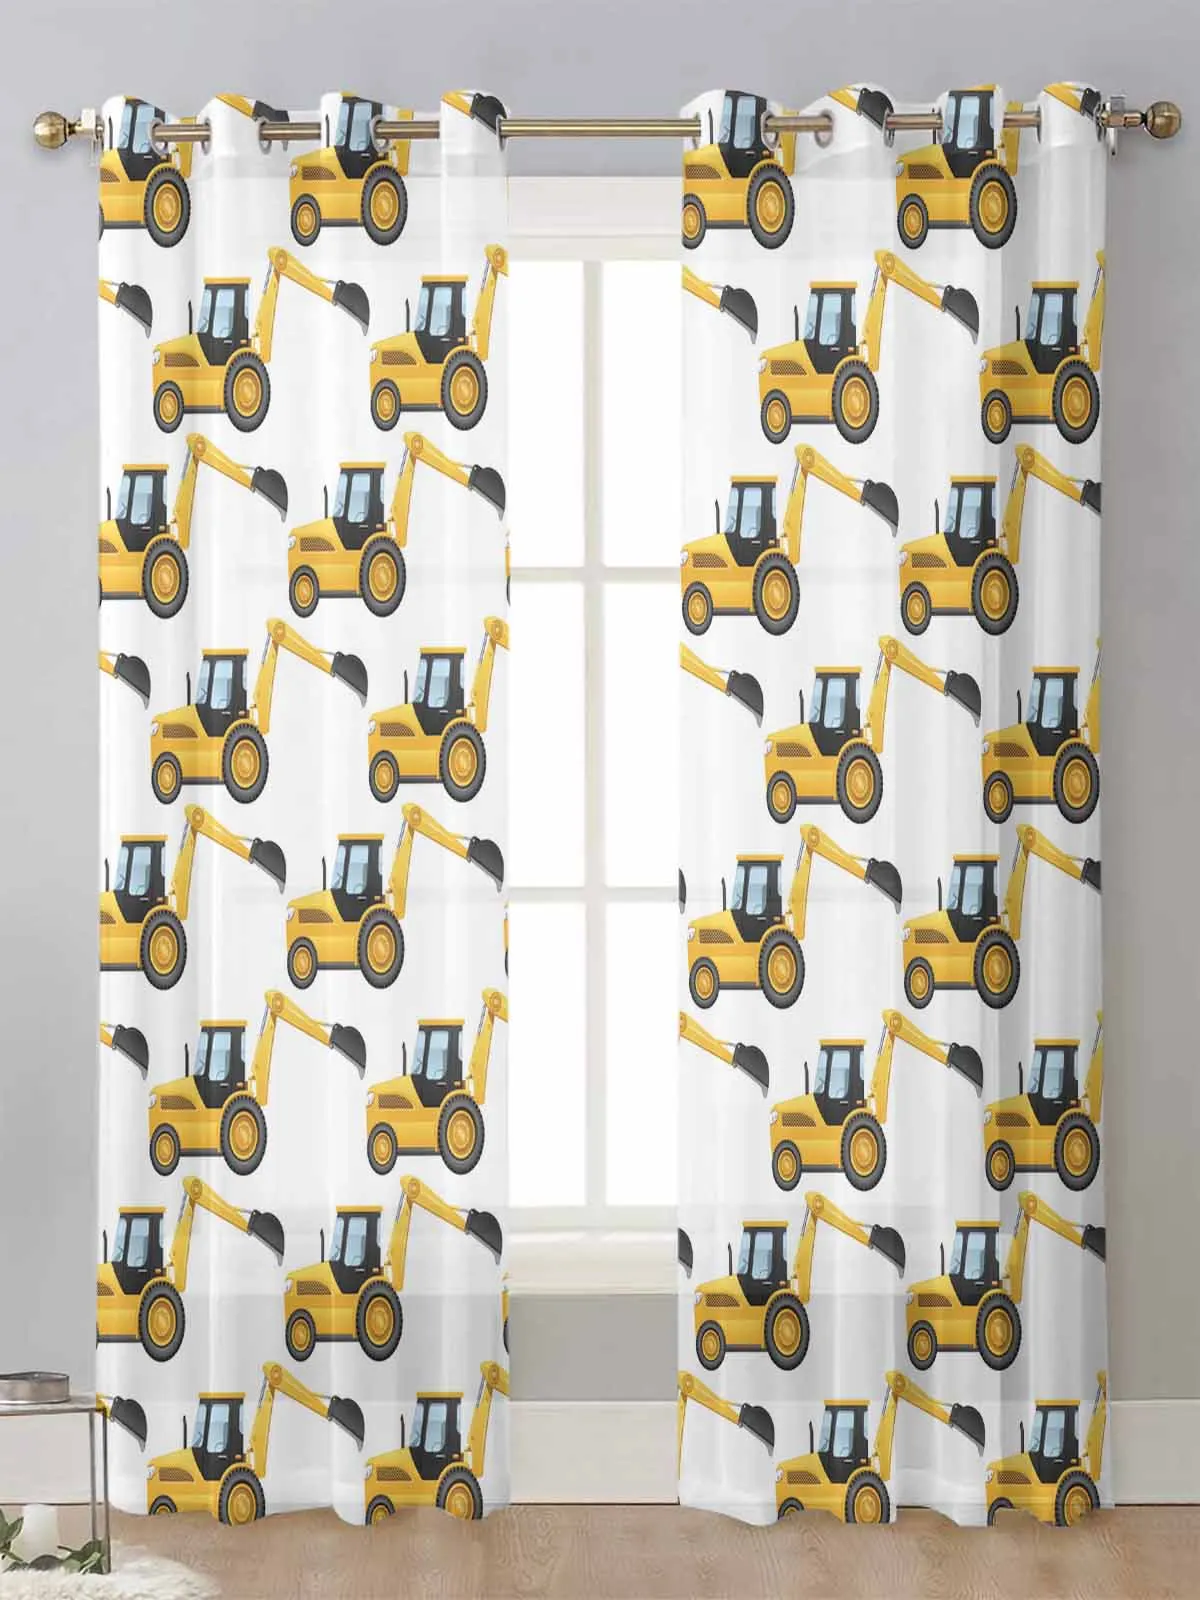 

Yellow Excavator Mechanical Car White Sheer Curtains For Living Room Window Voile Tulle Curtain Cortinas Drapes Home Decor